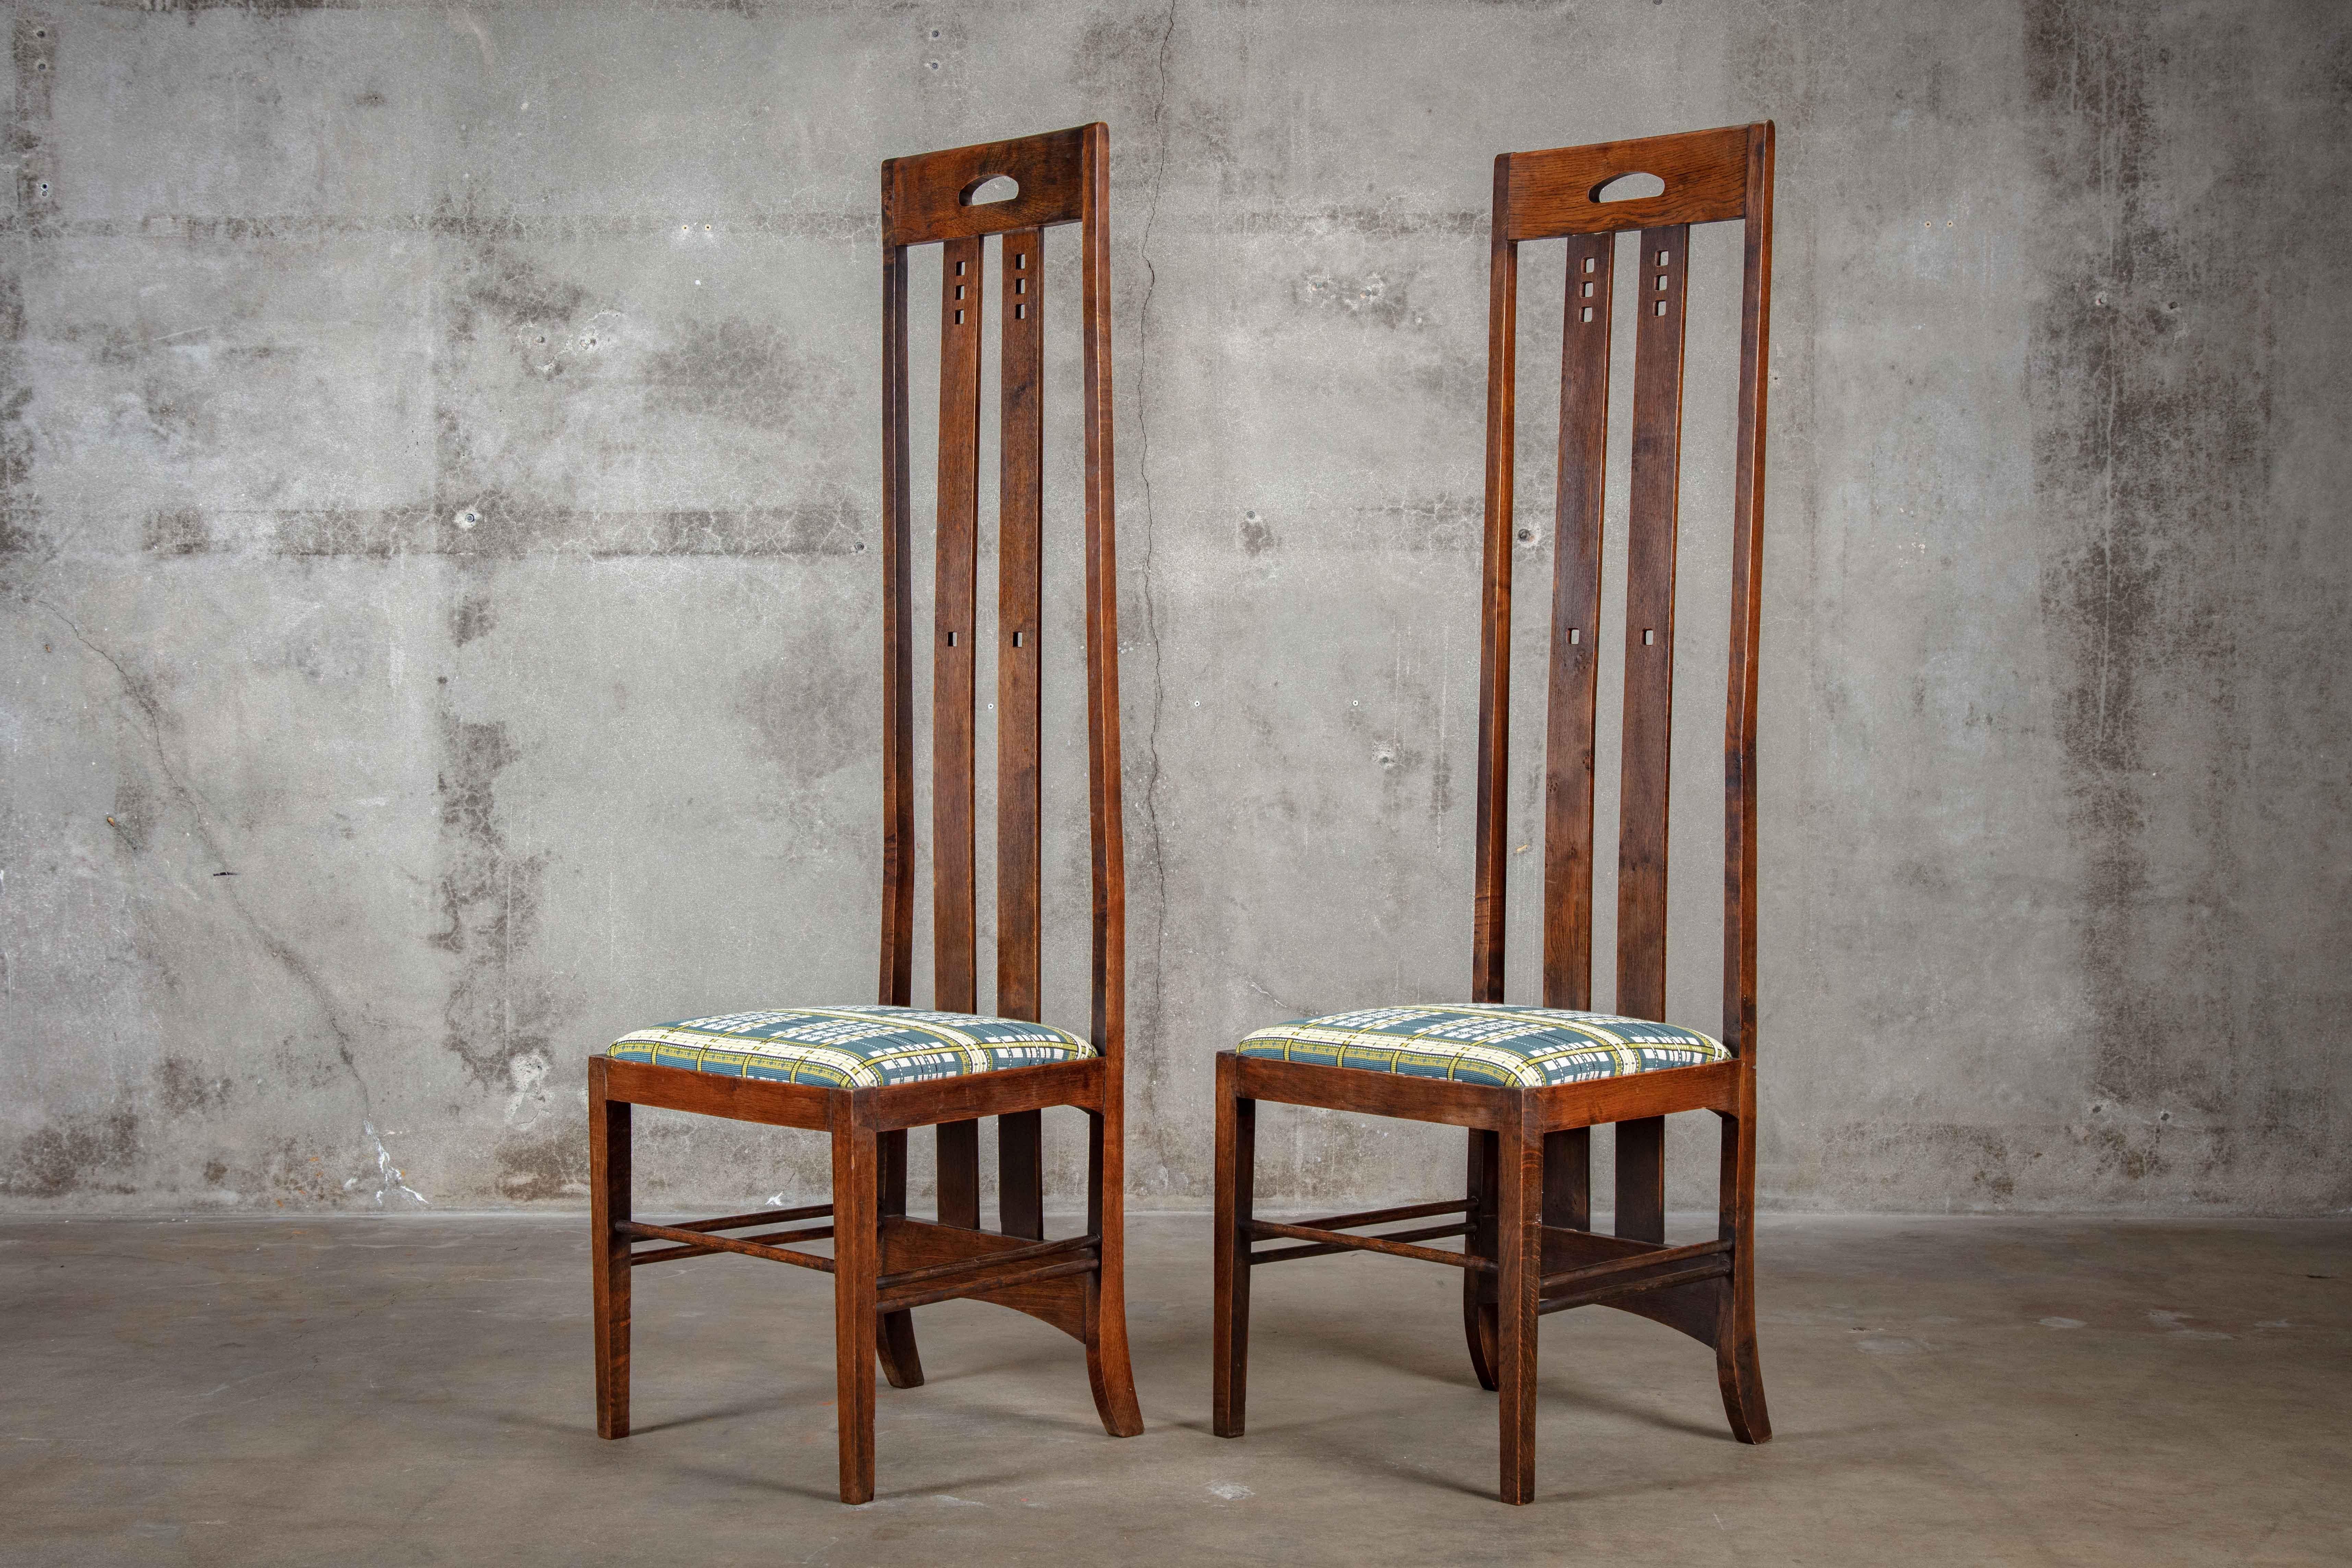 Set of 8 Charles Rennie Mackintosh chairs in oak, 20th century

Measures: Seat height 17.5 inches.